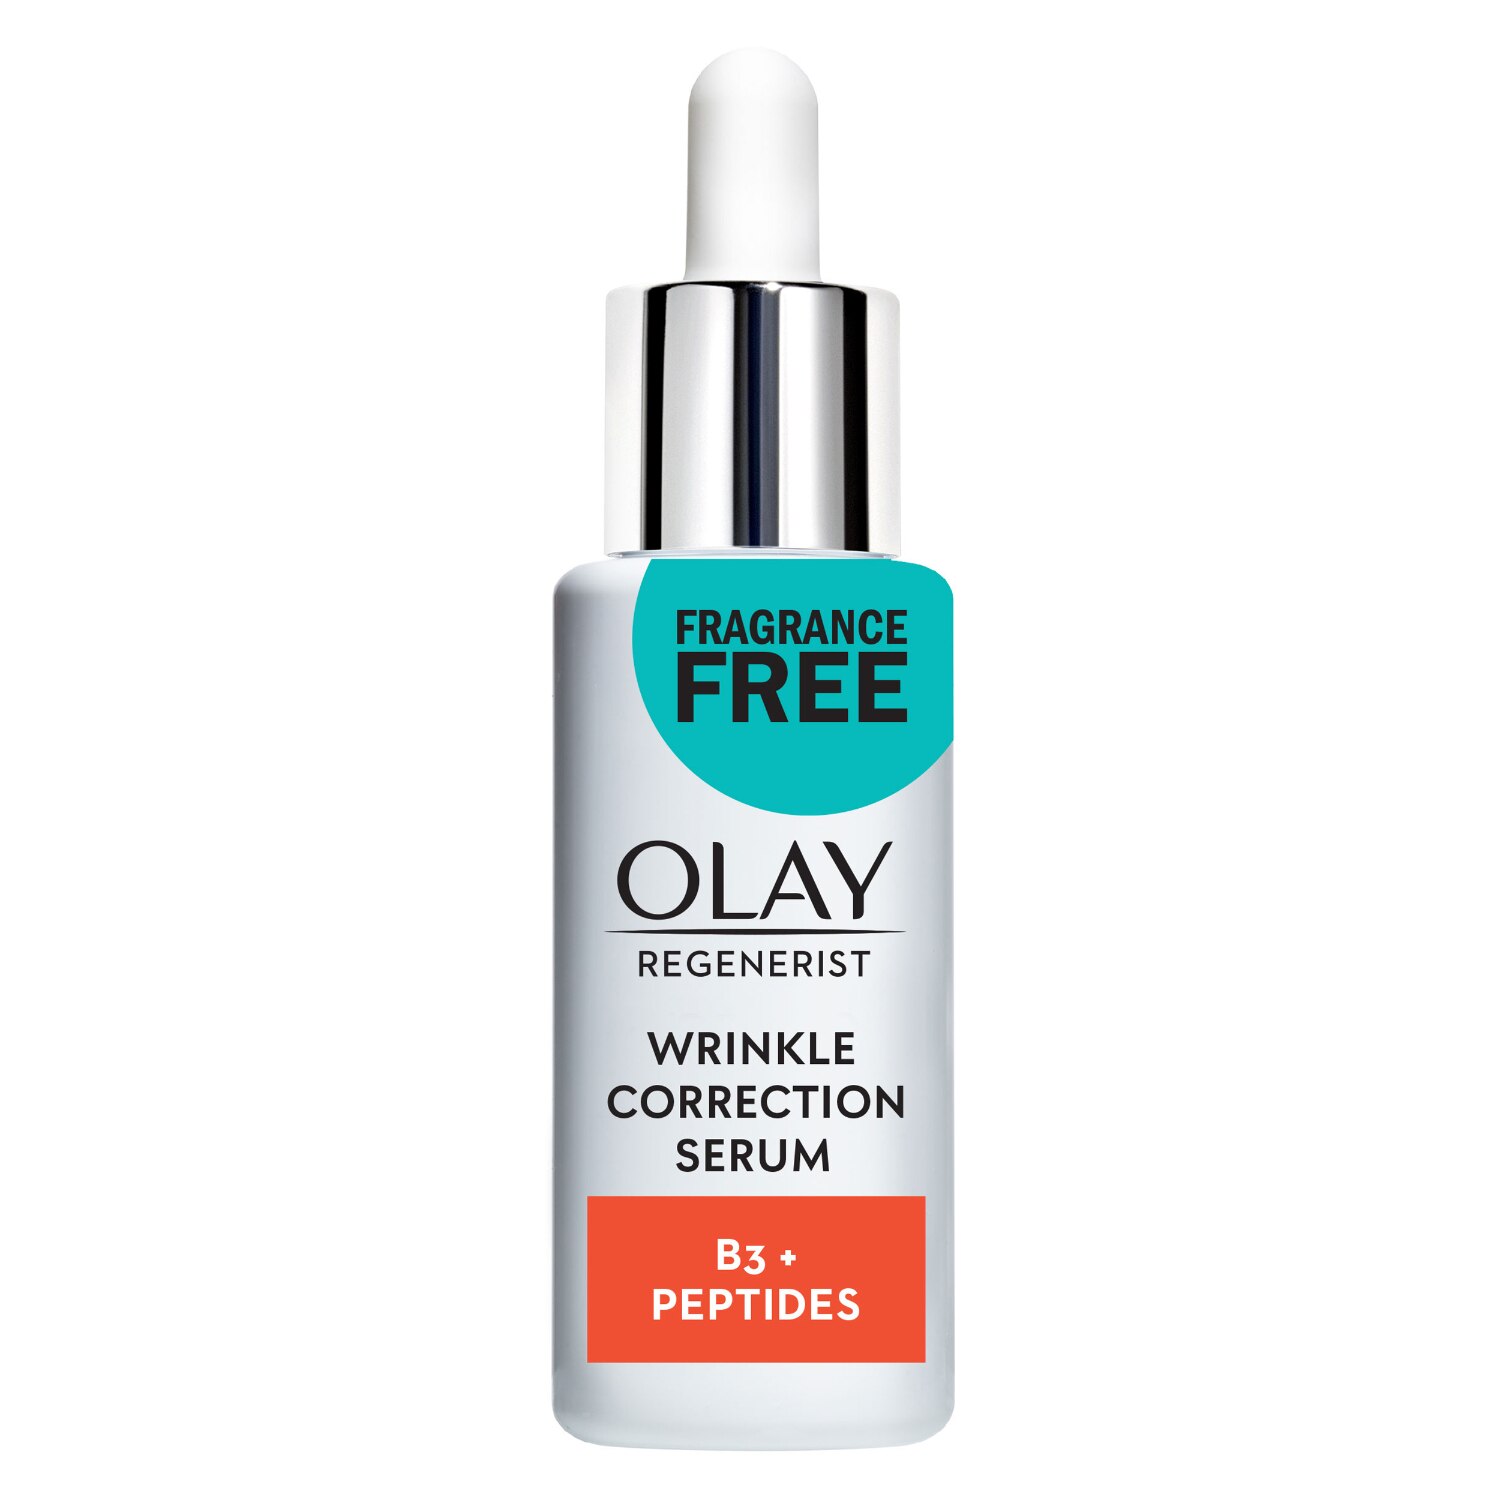 Olay Wrinkle Correction Serum with Vitamin B3+ Collagen Peptides, 1.3 OZ